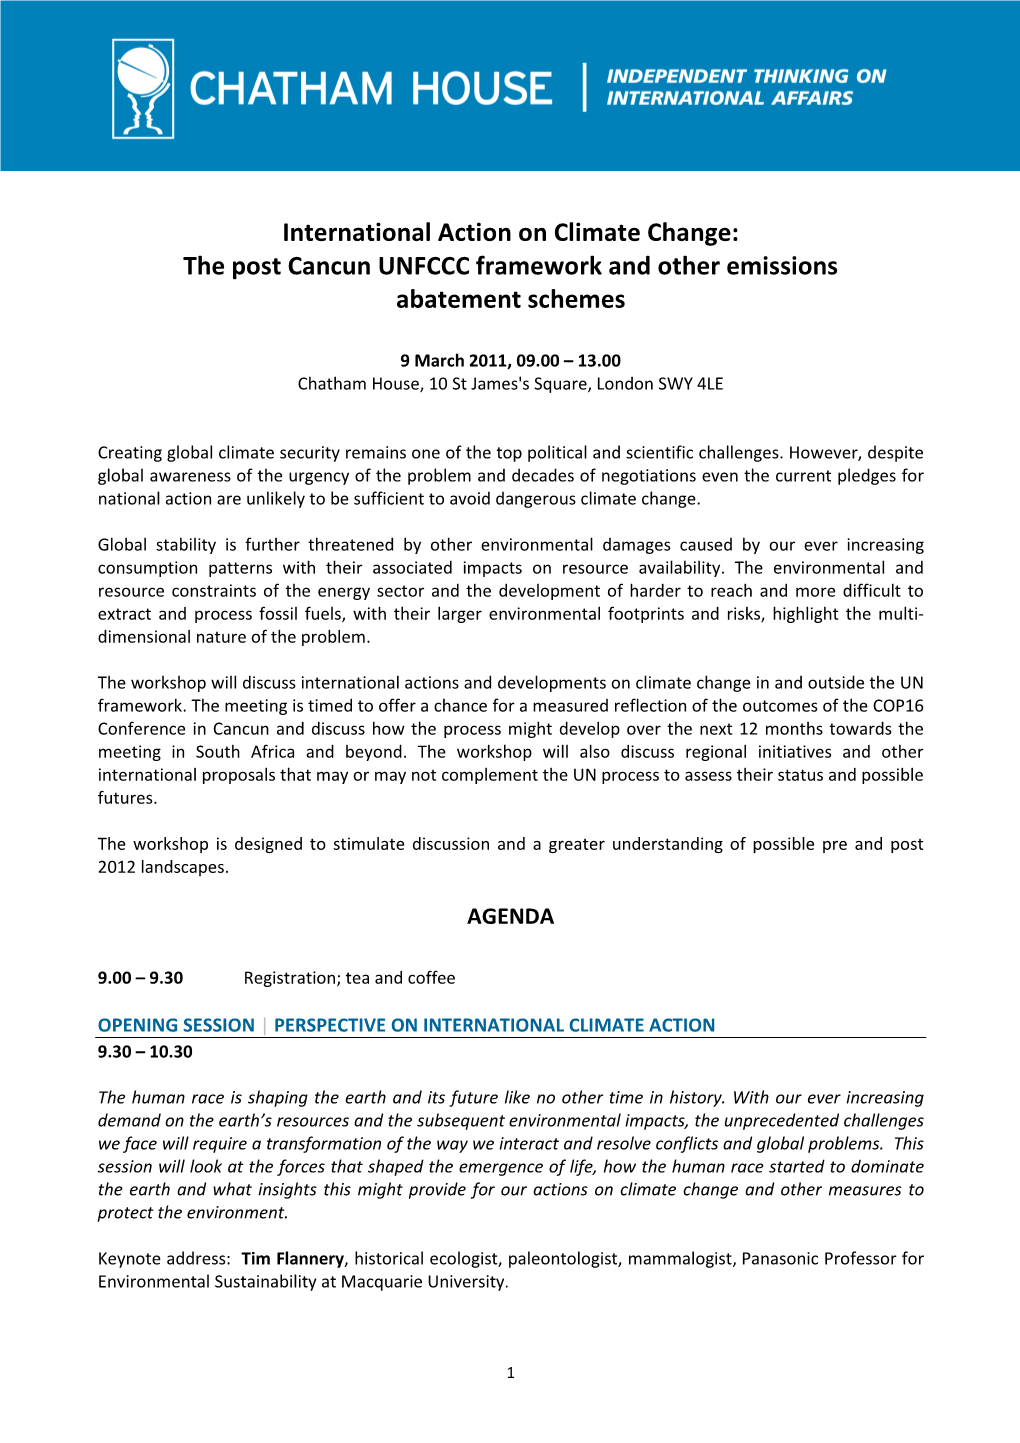 International Action on Climate Change: the Post Cancun UNFCCC Framework and Other Emissions Abatement Schemes